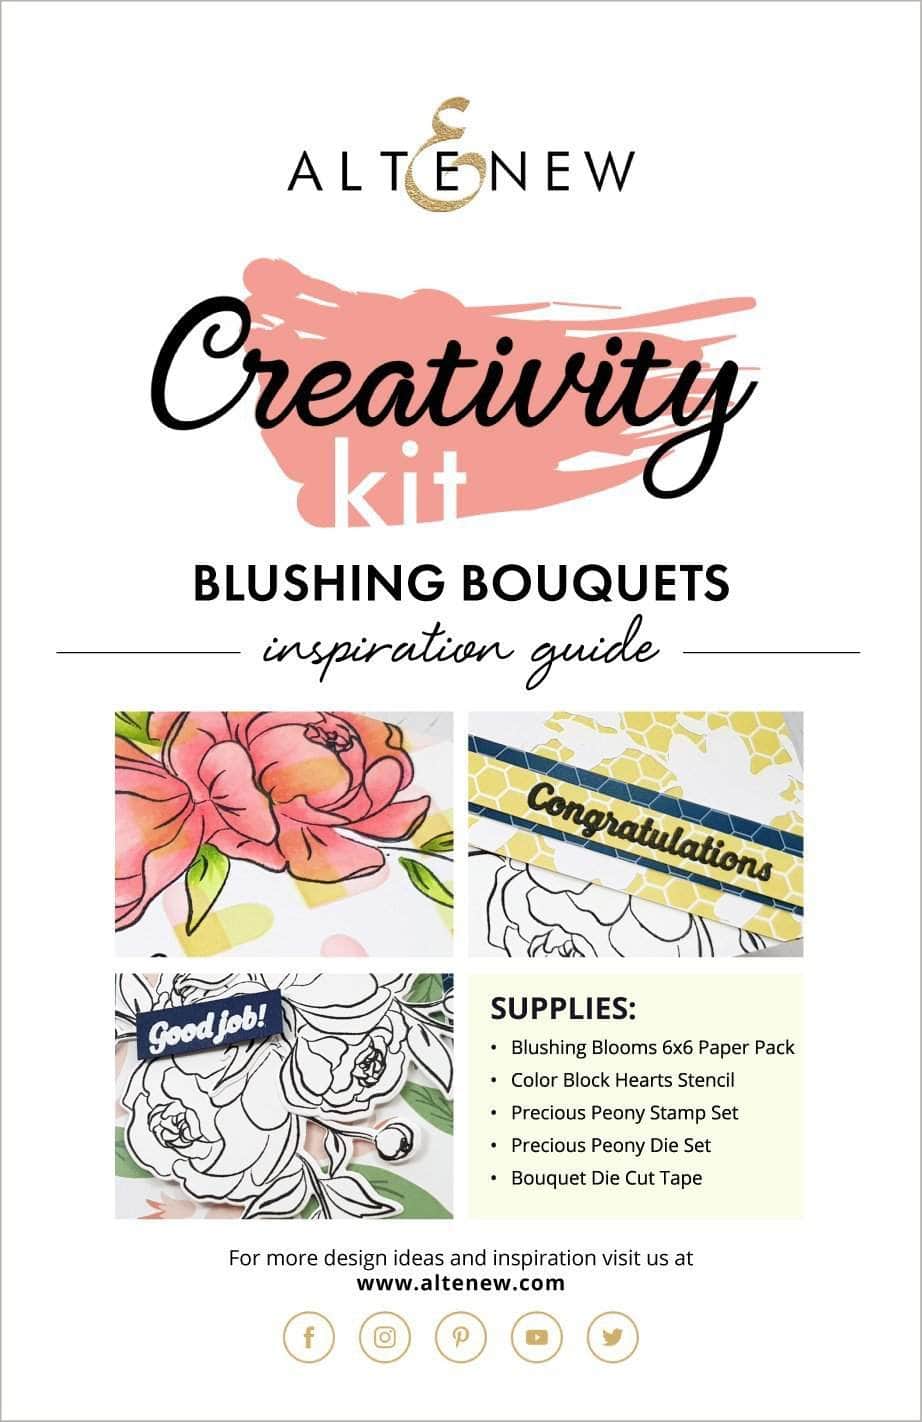 Printed Media Blushing Bouquets Creativity Kit Inspiration Guide